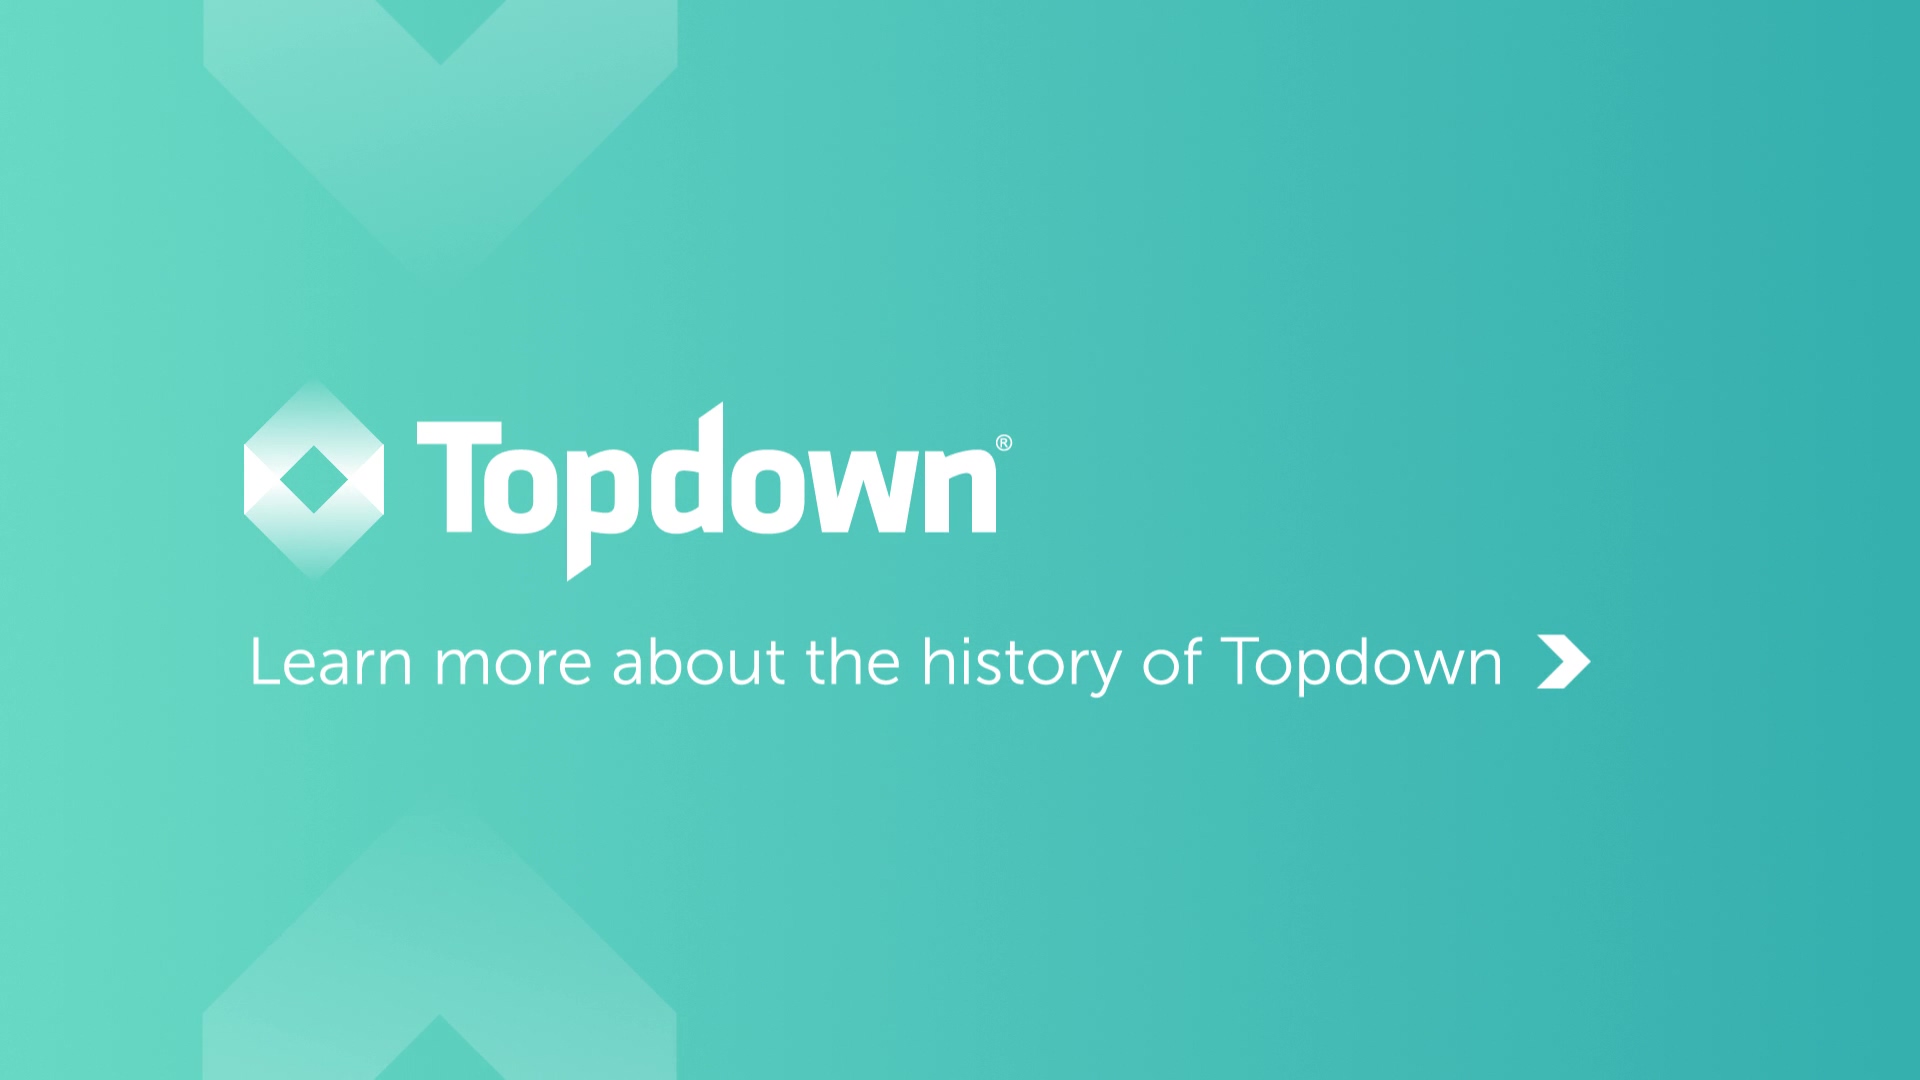 Story of Topdown